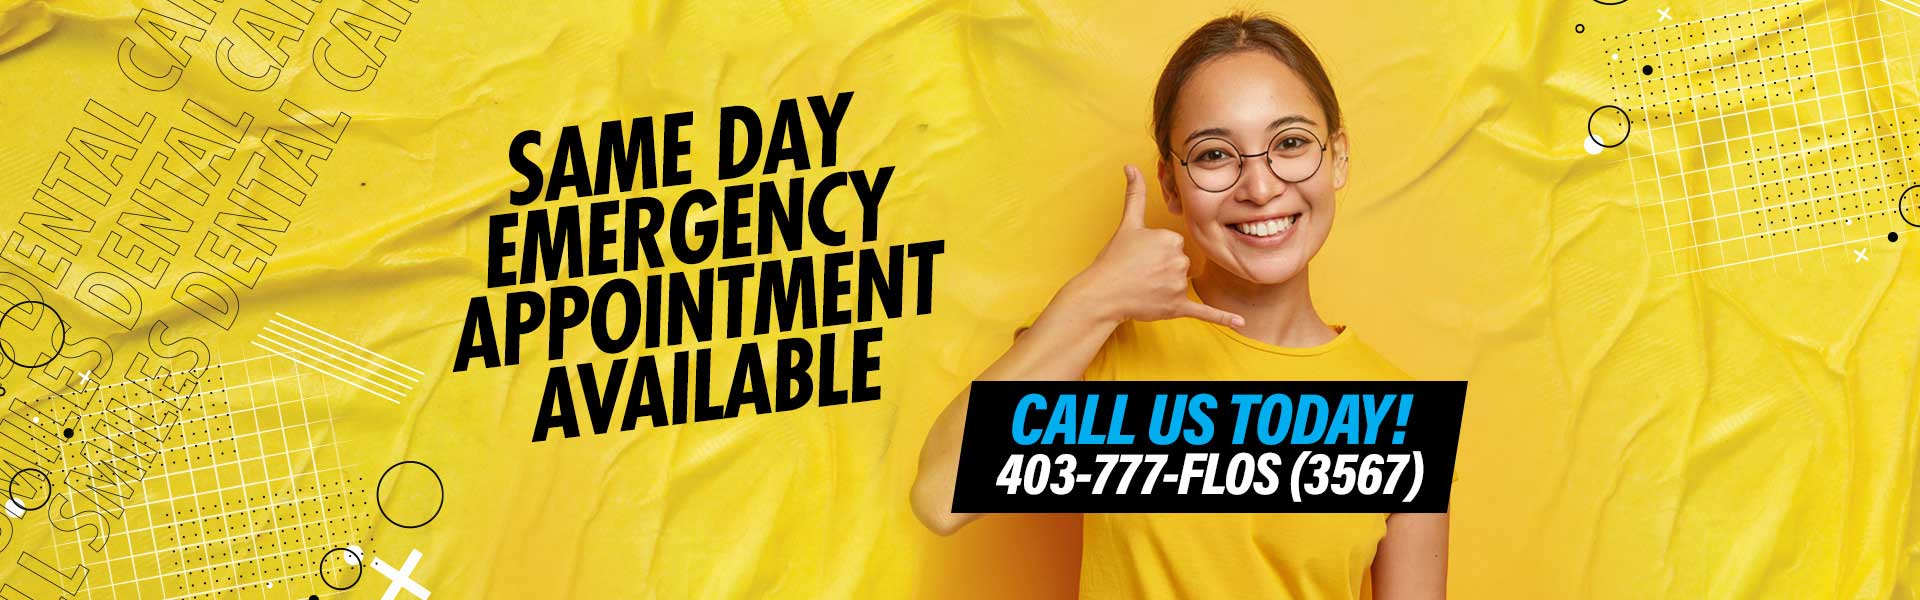 Same-Day Emergency Appointments Available at All Smiles Dental Care